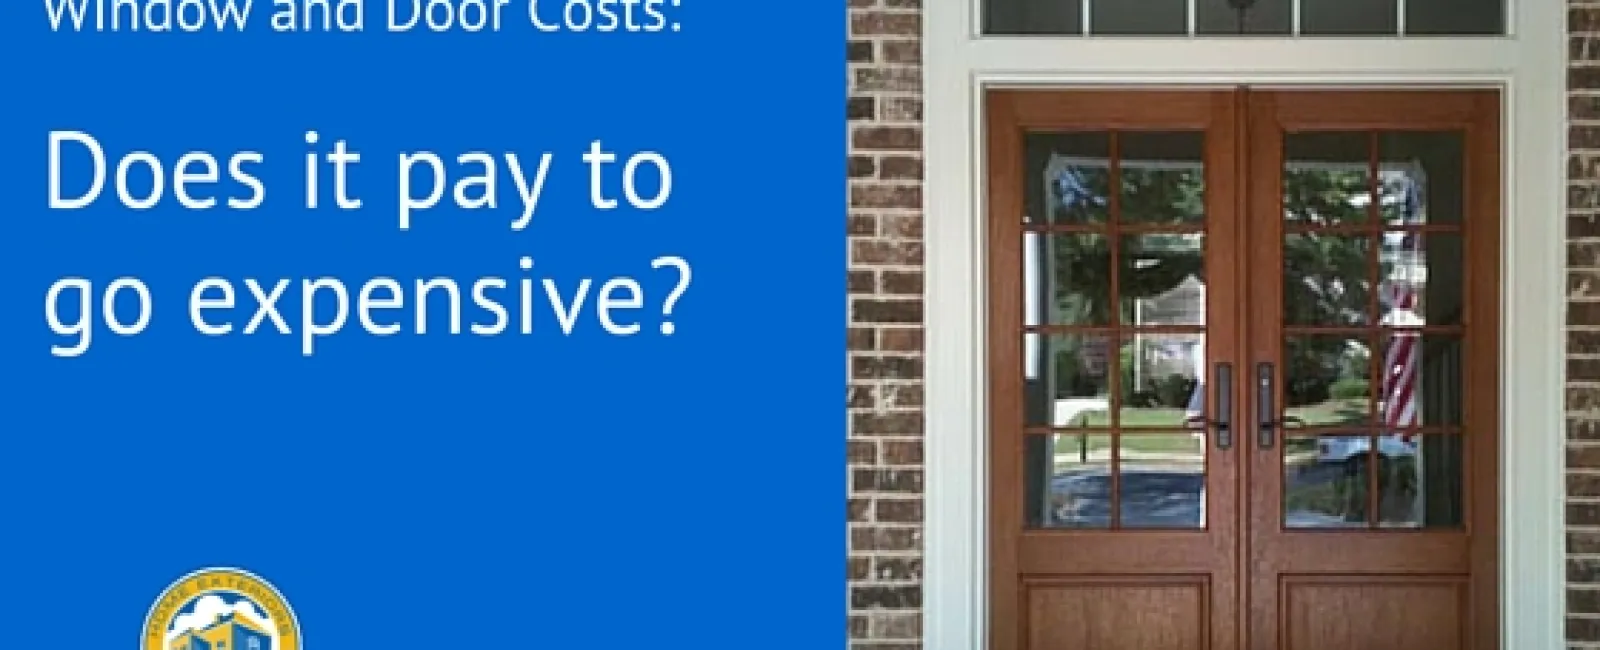 When purchasing replacement windows or doors, does it pay to go expensive?